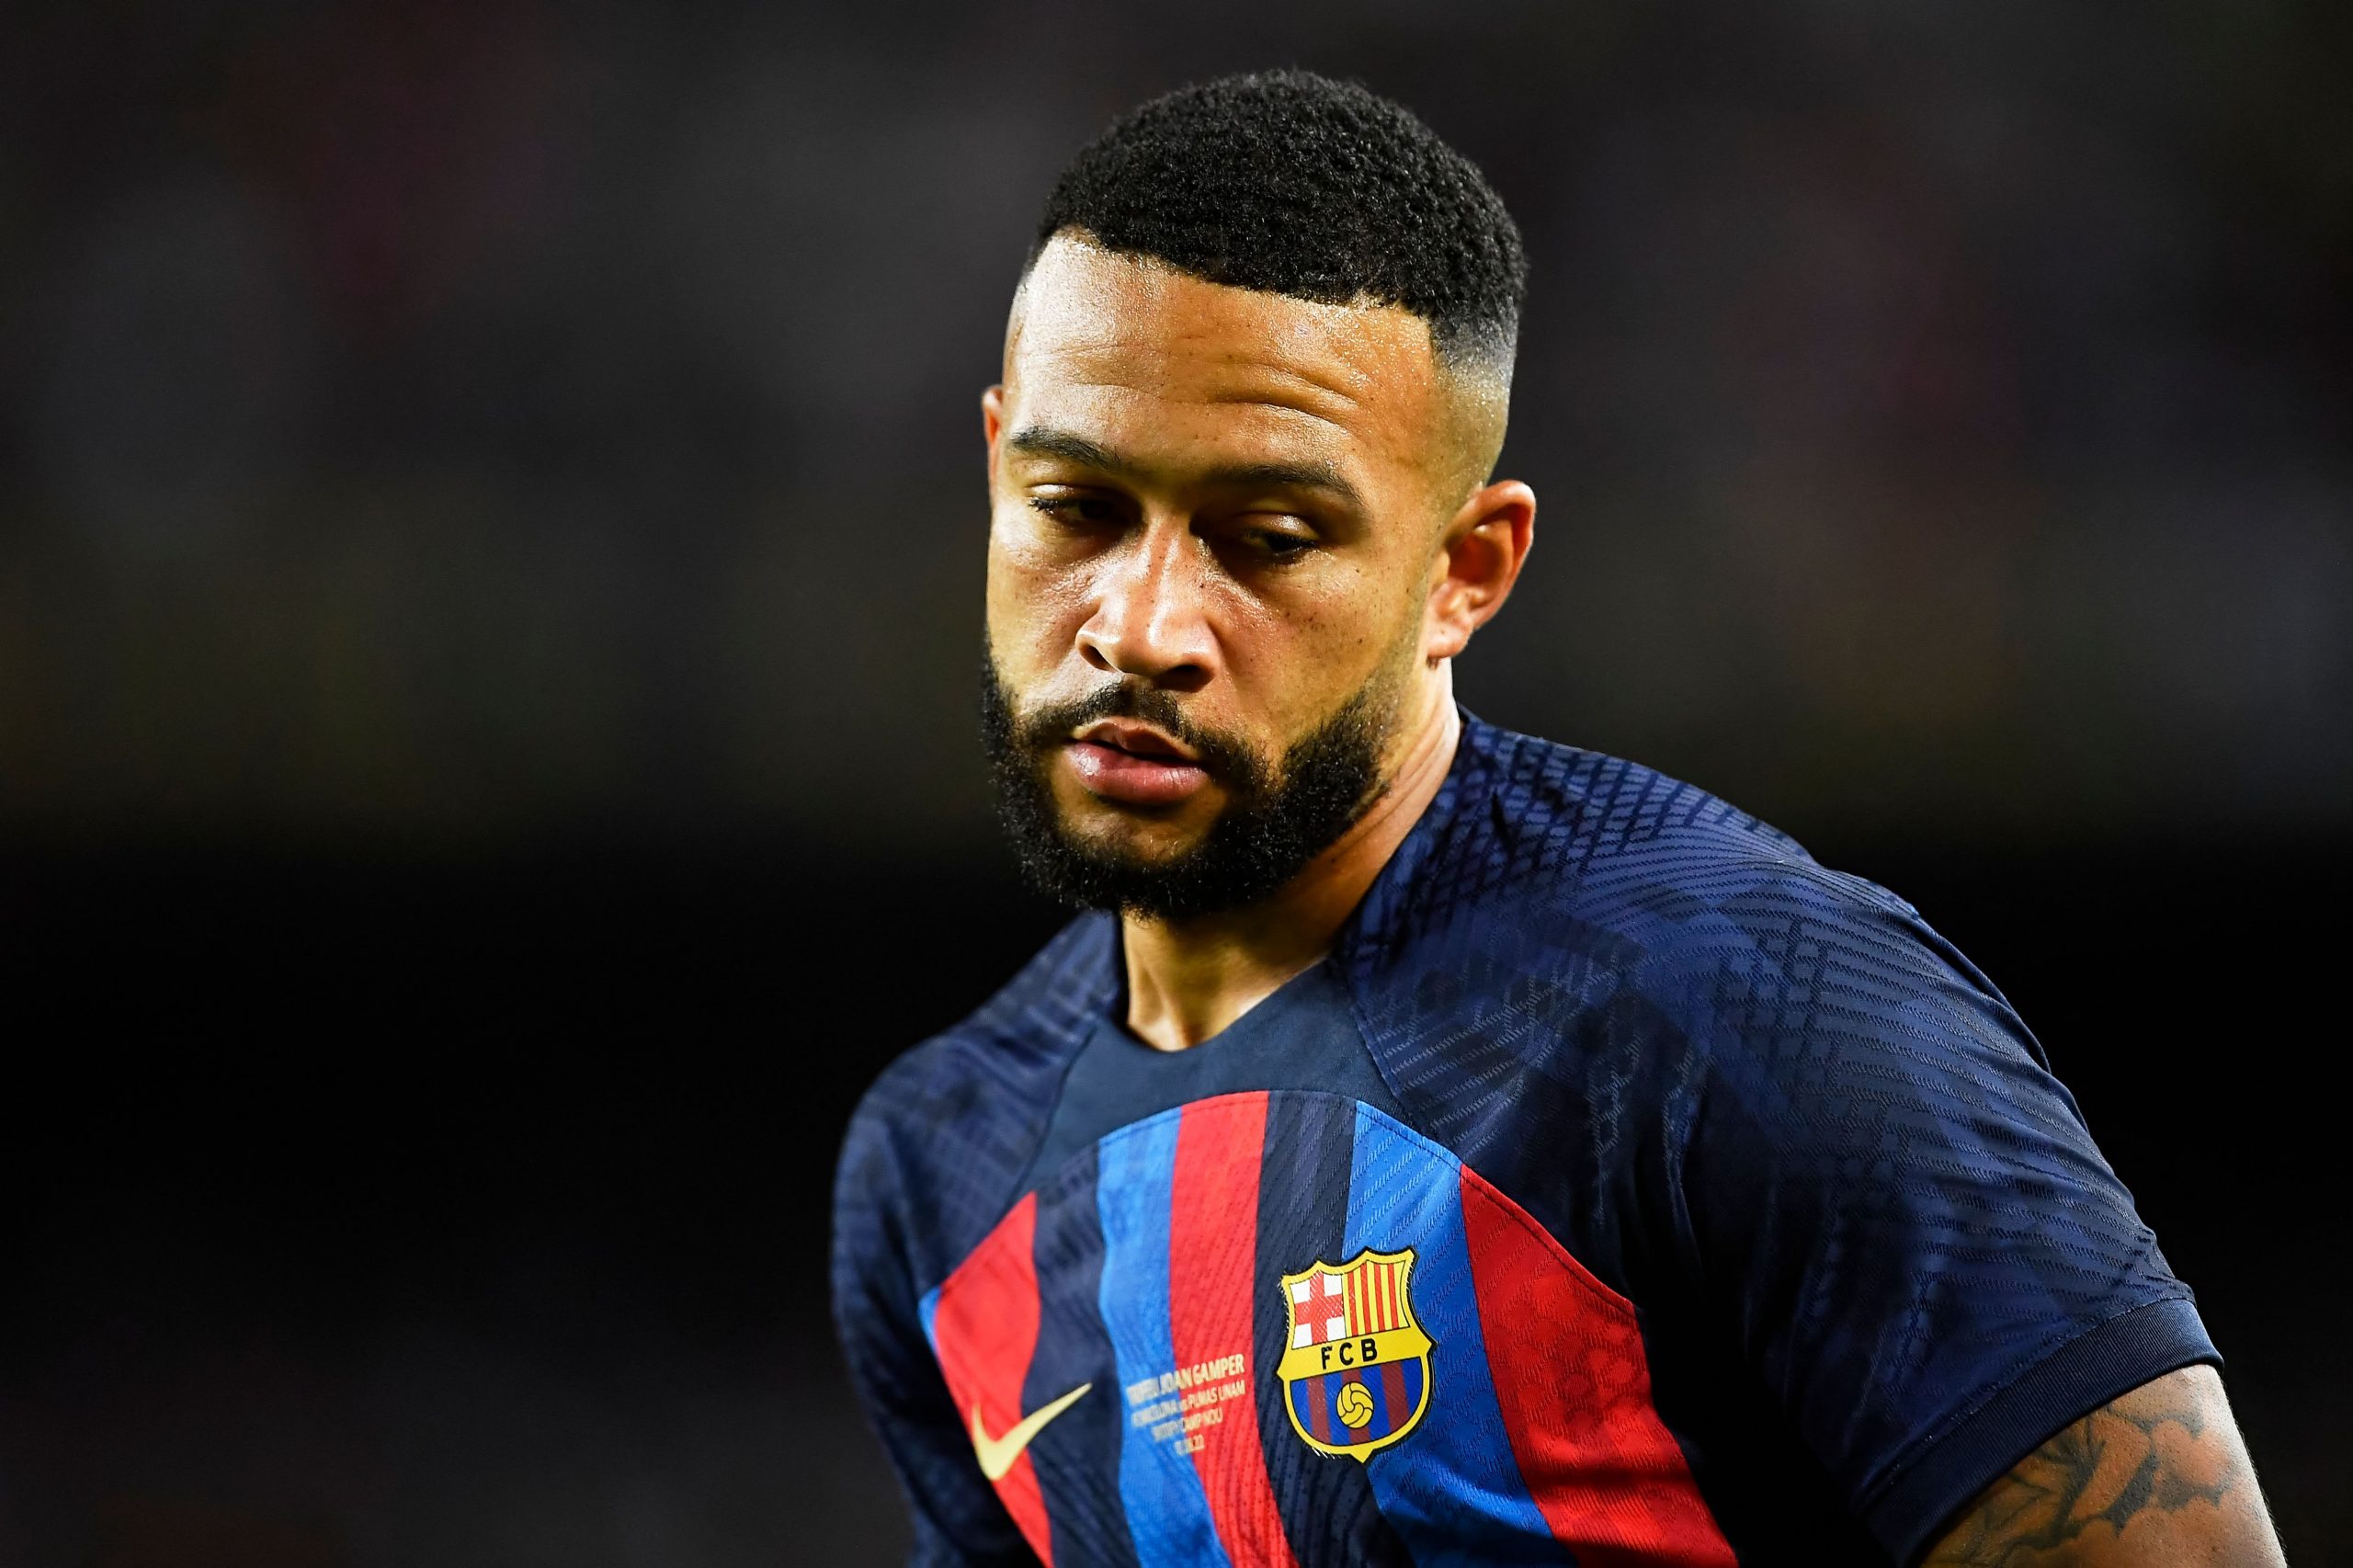 Arsenal and Manchester United reach out to representatives of Barcelona forward Memphis Depay.